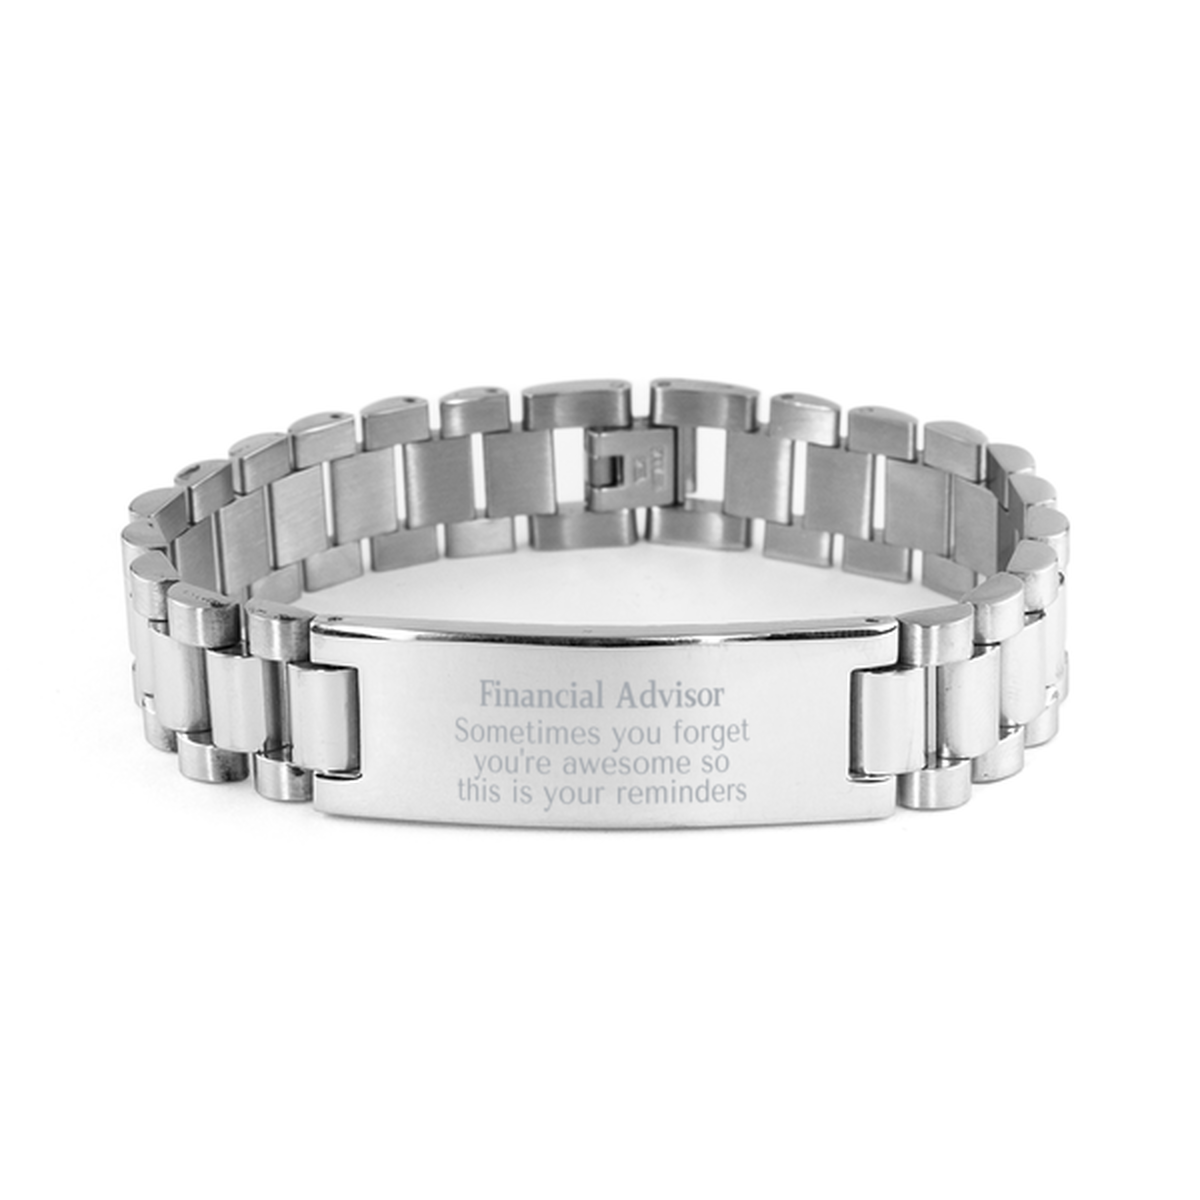 Sentimental Financial Advisor Ladder Stainless Steel Bracelet, Financial Advisor Sometimes you forget you're awesome so this is your reminders, Graduation Christmas Birthday Gifts for Financial Advisor, Men, Women, Coworkers